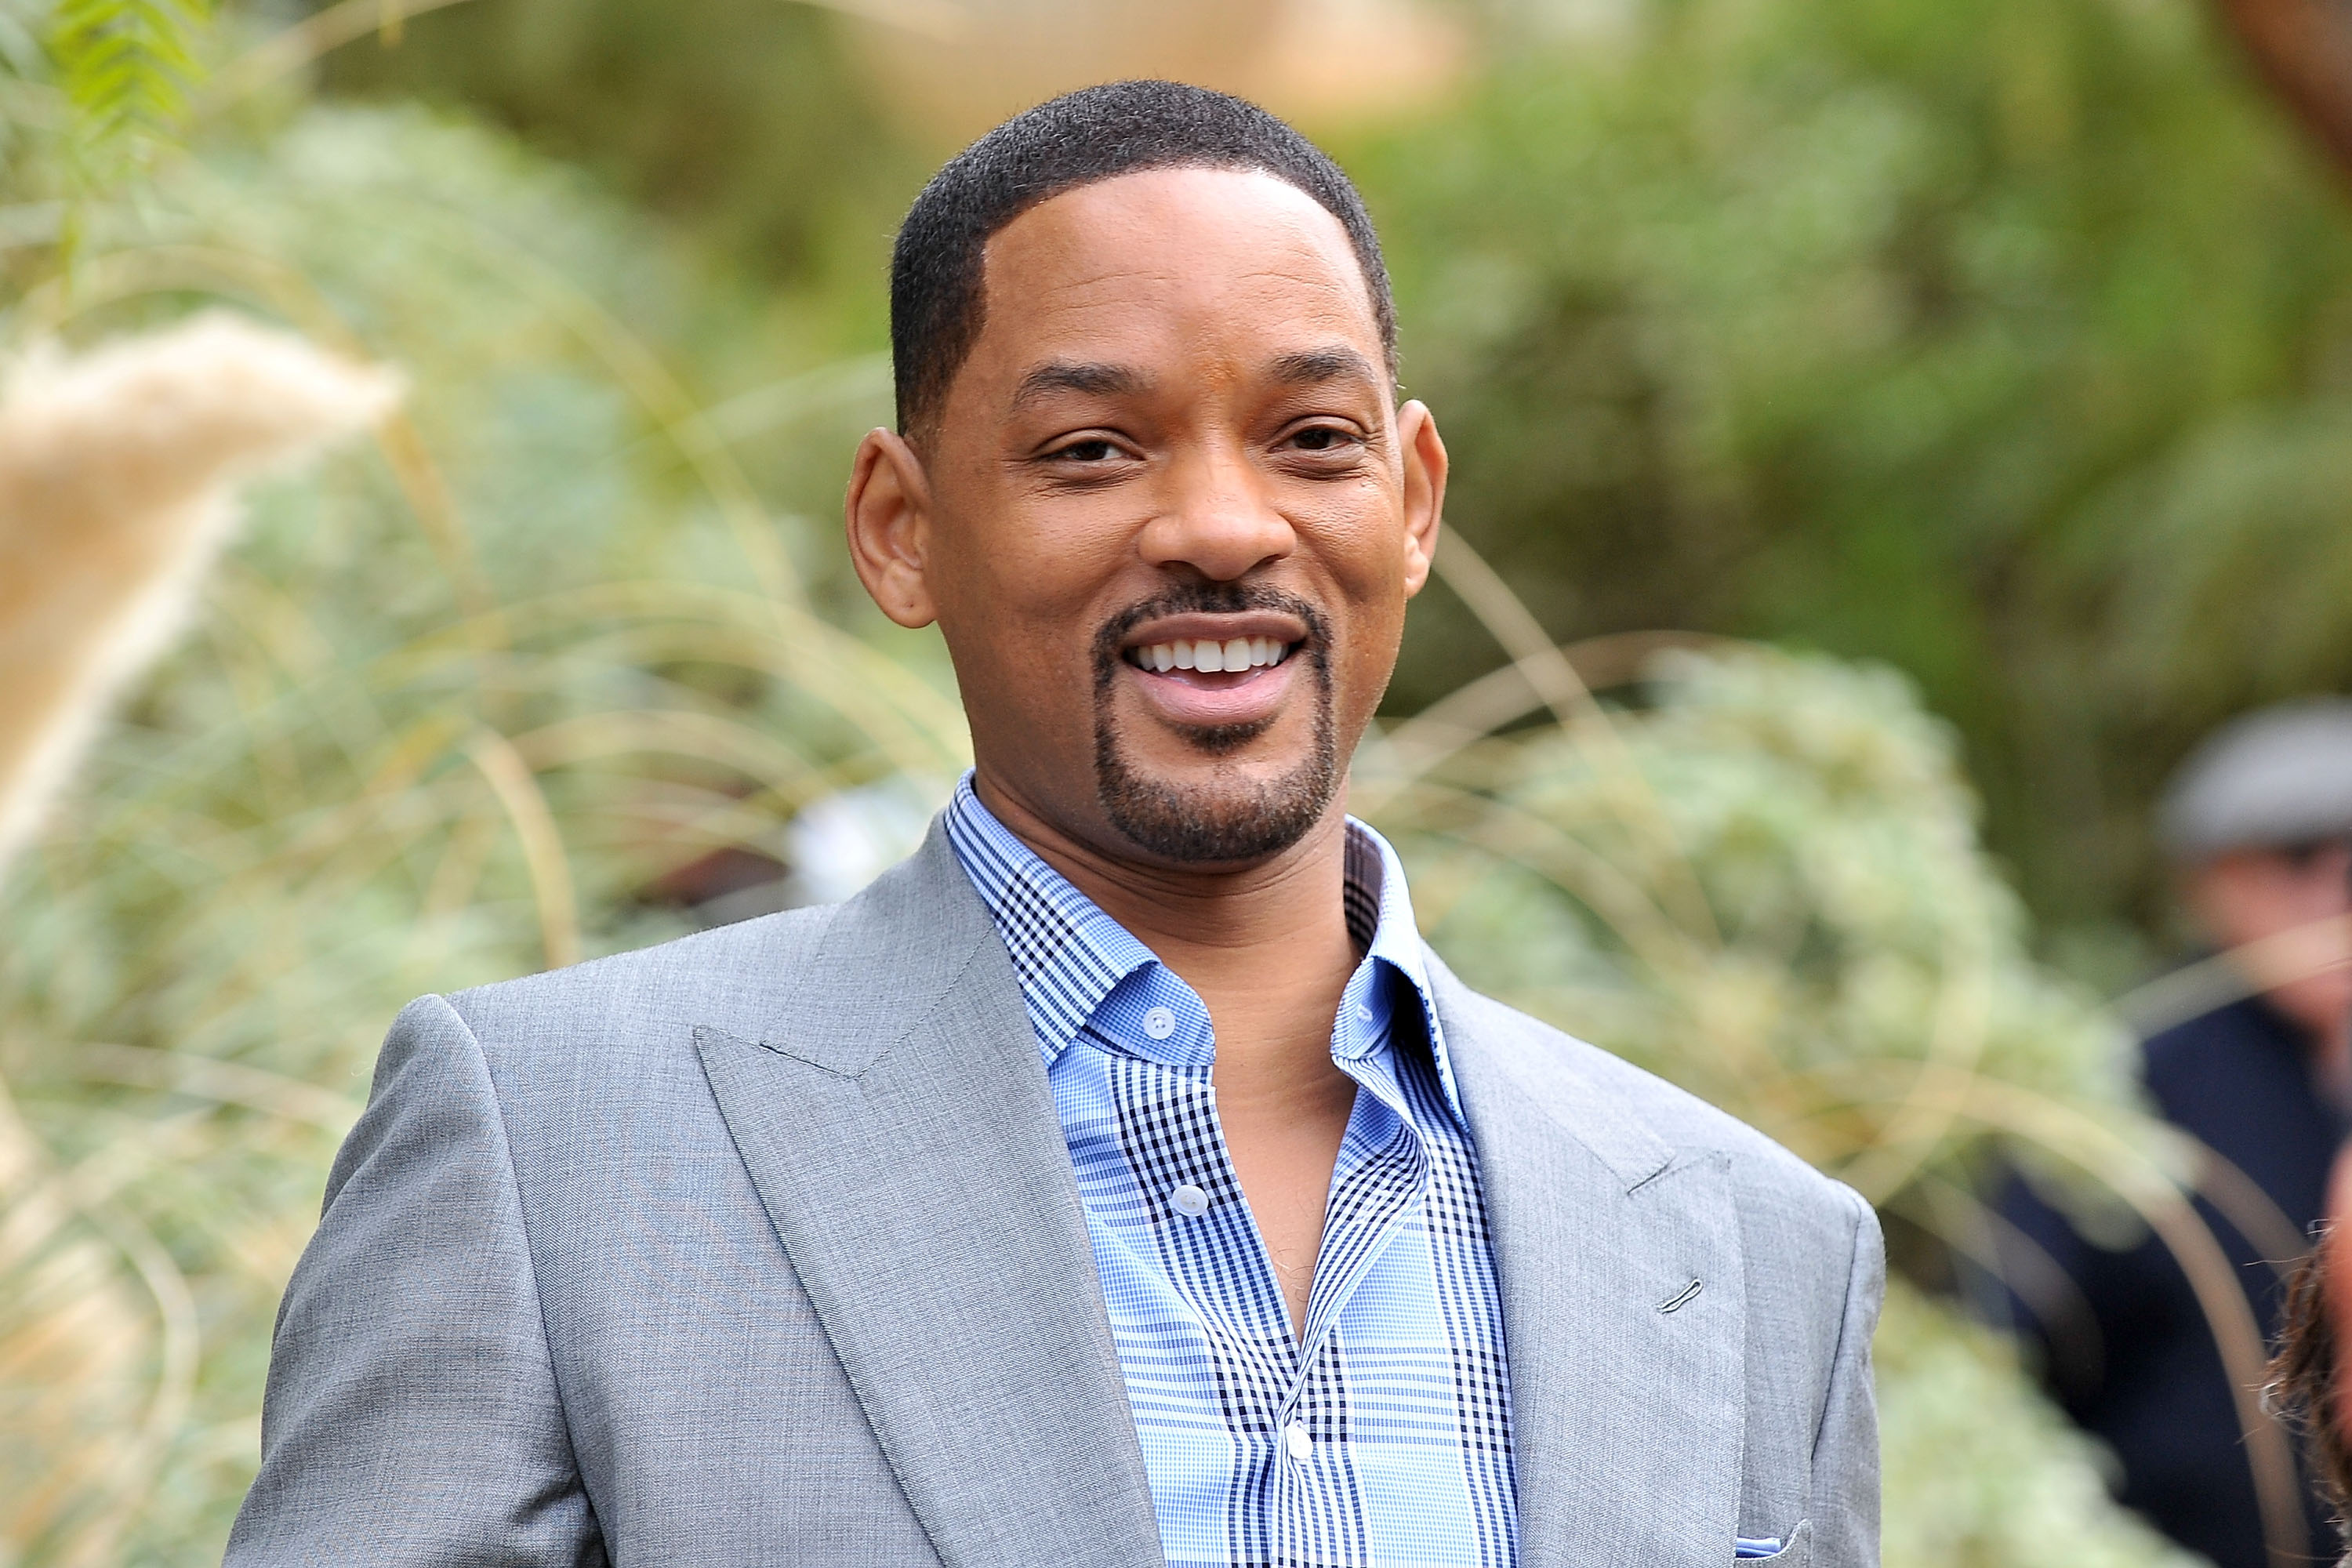 Will Smith attends Variety’s Creative Impact Awards and 10 Directors To Watch Brunch at the Parker Palm Springs on January 3, 2016 in Palm Springs, California.